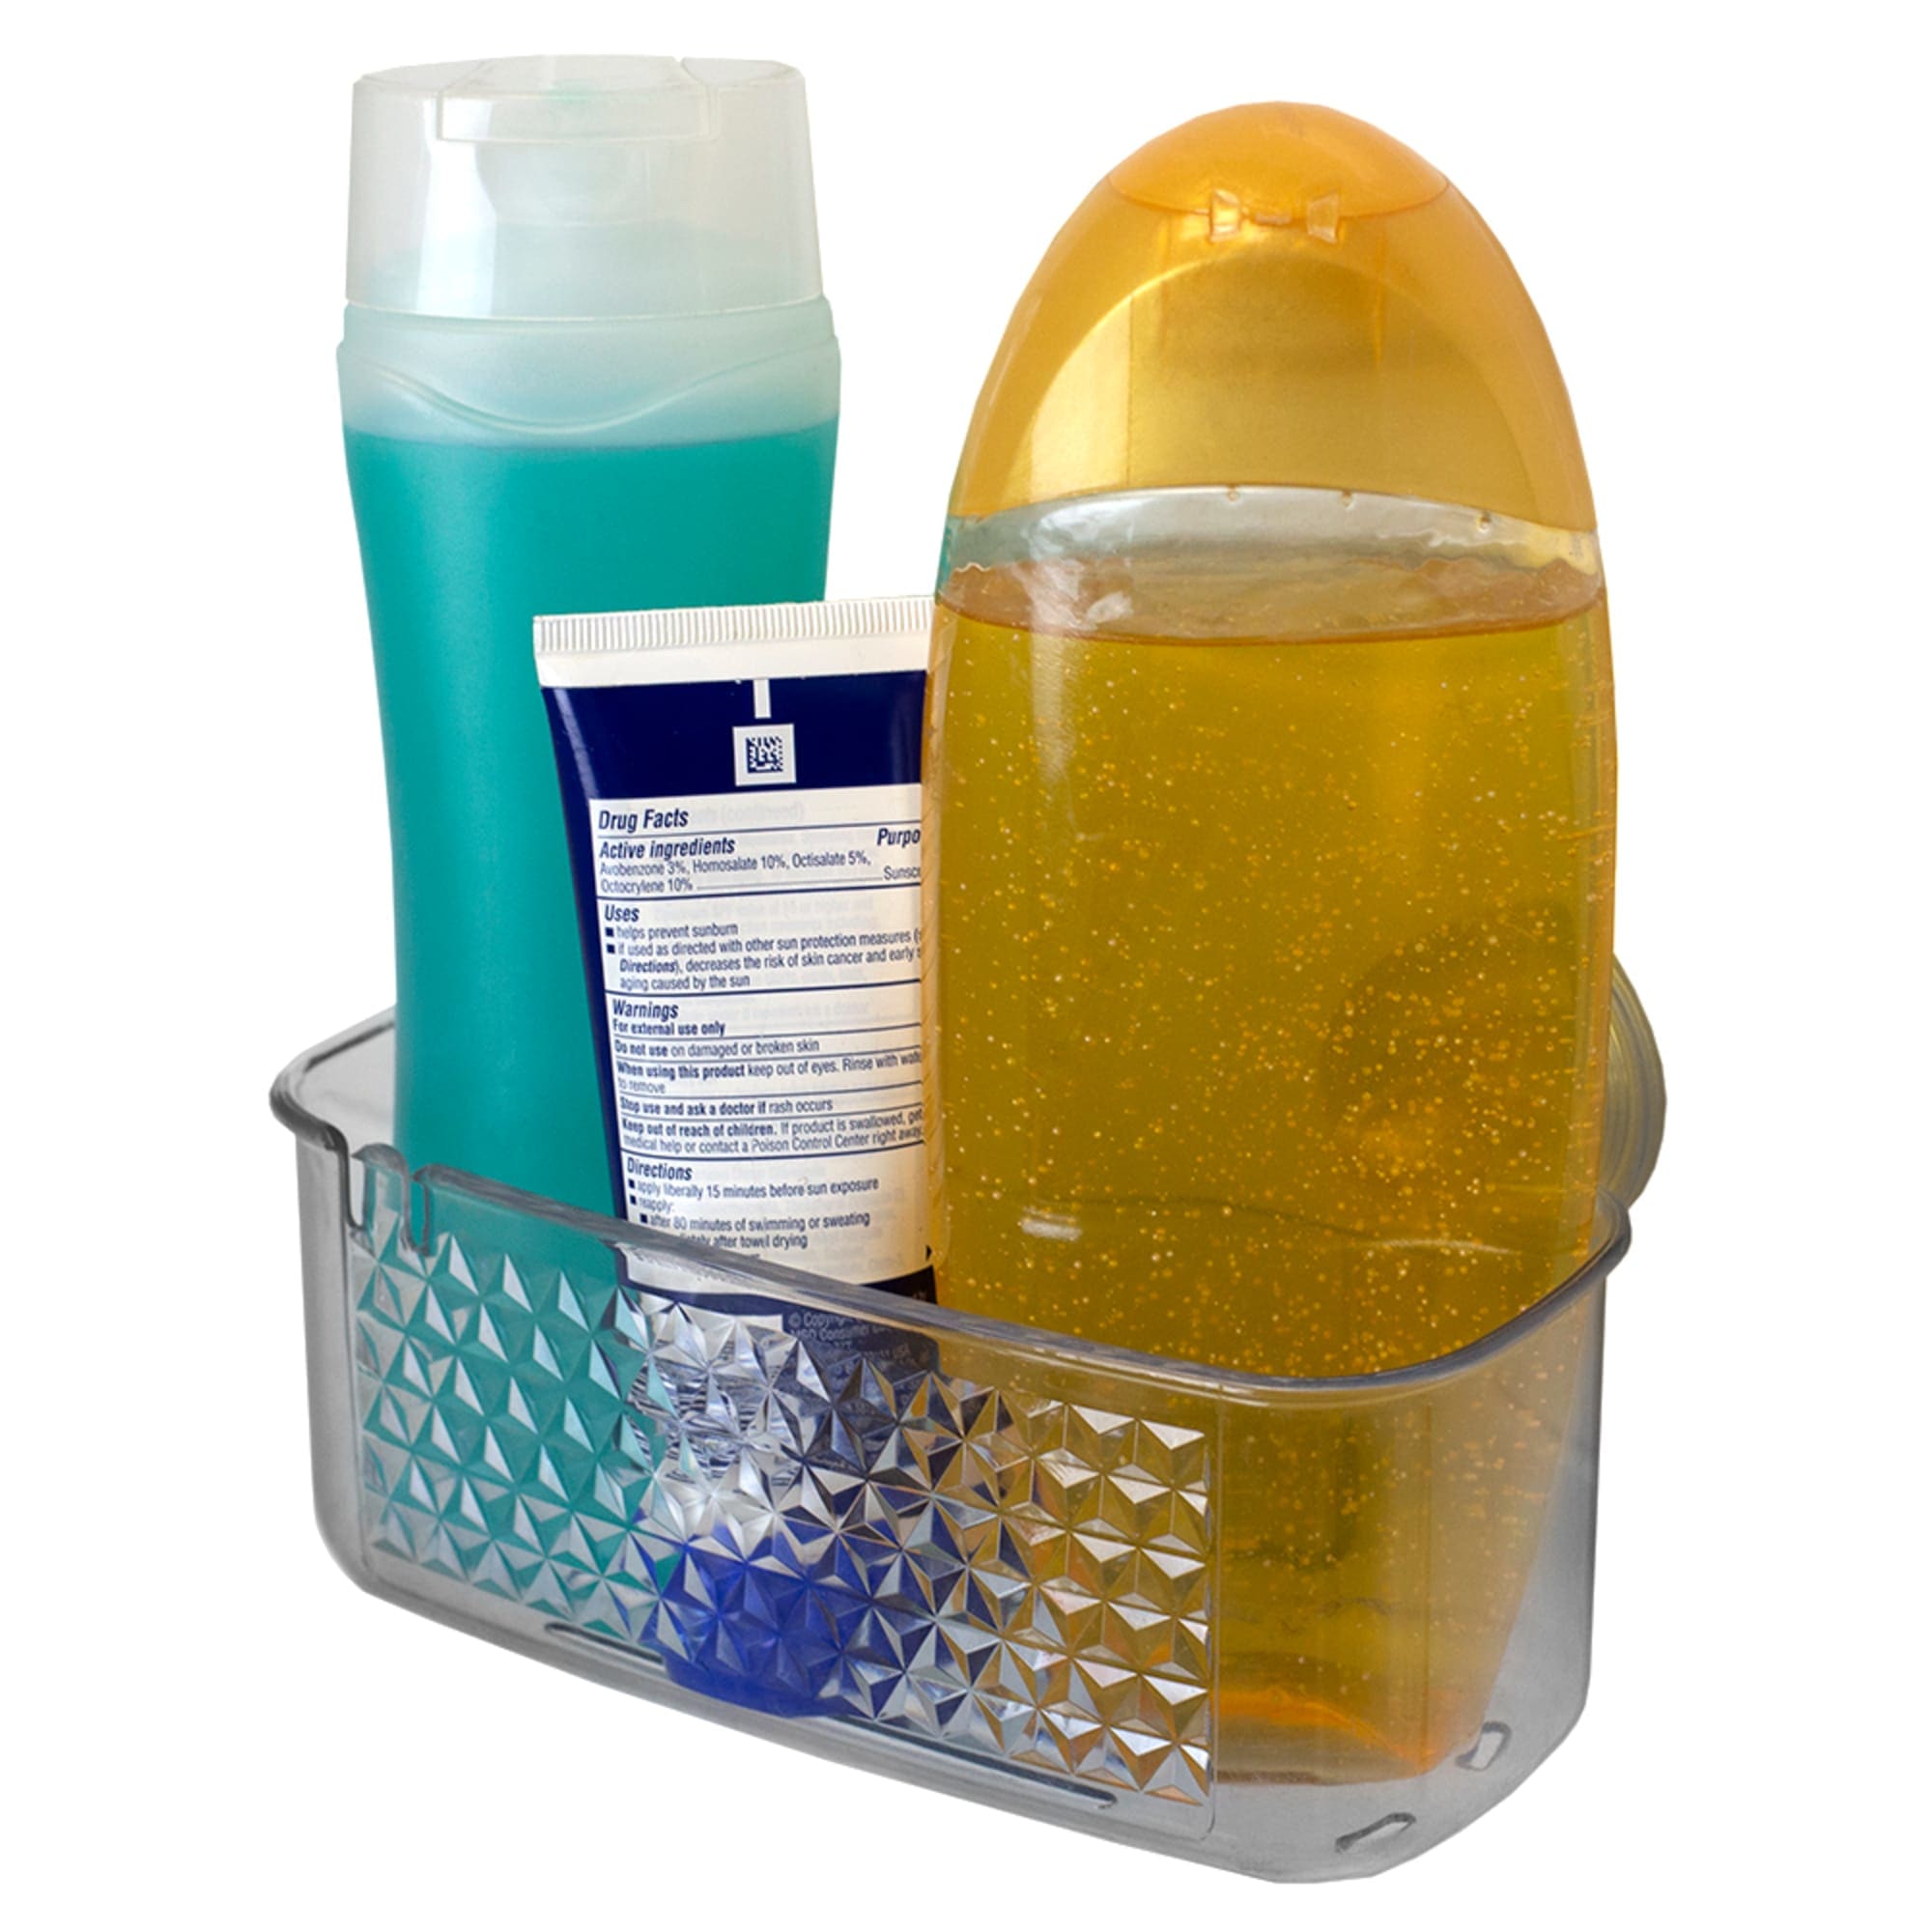 Suction Cup Shower Caddy, Second Use Building Materials and Salvage